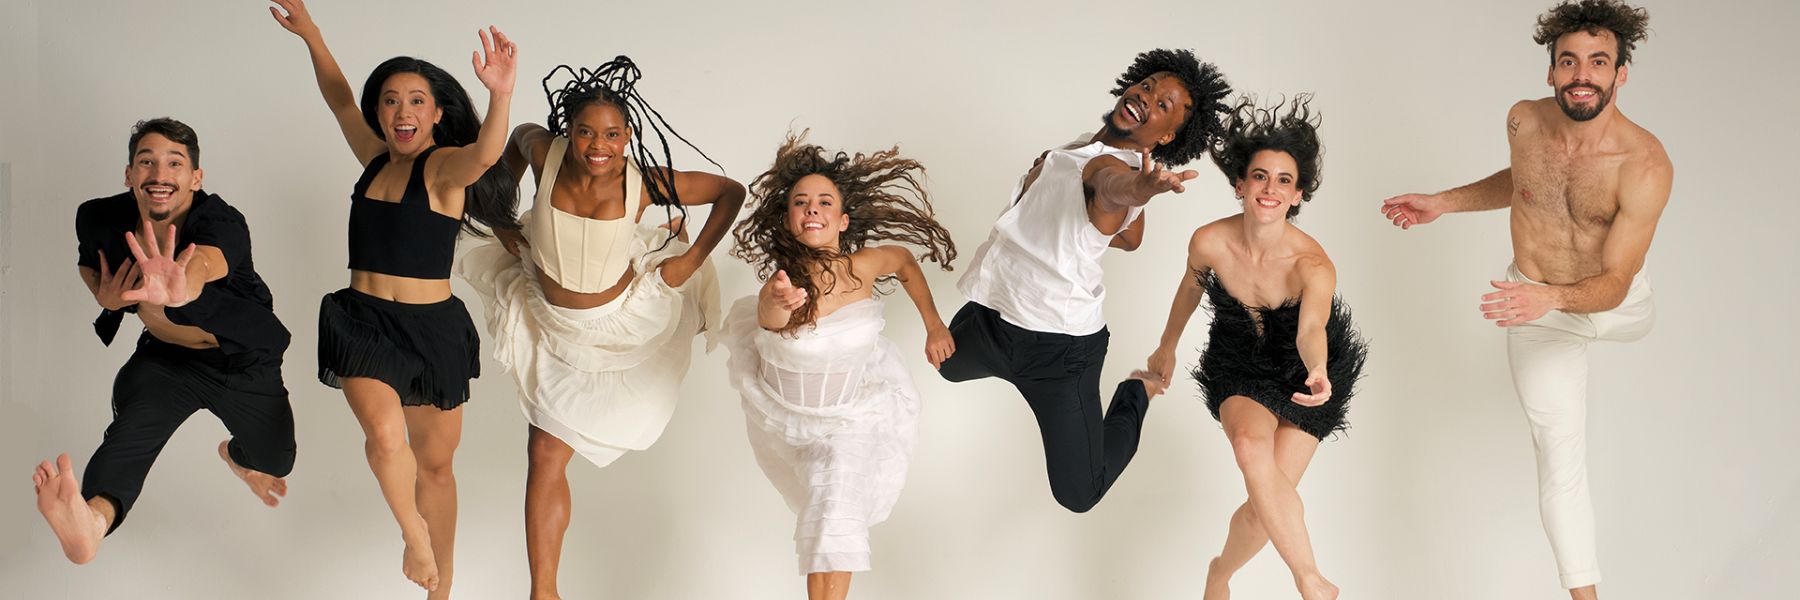 Celebrating theater and performing arts in St. Louis, members of Dance St. Louis strike a pose.